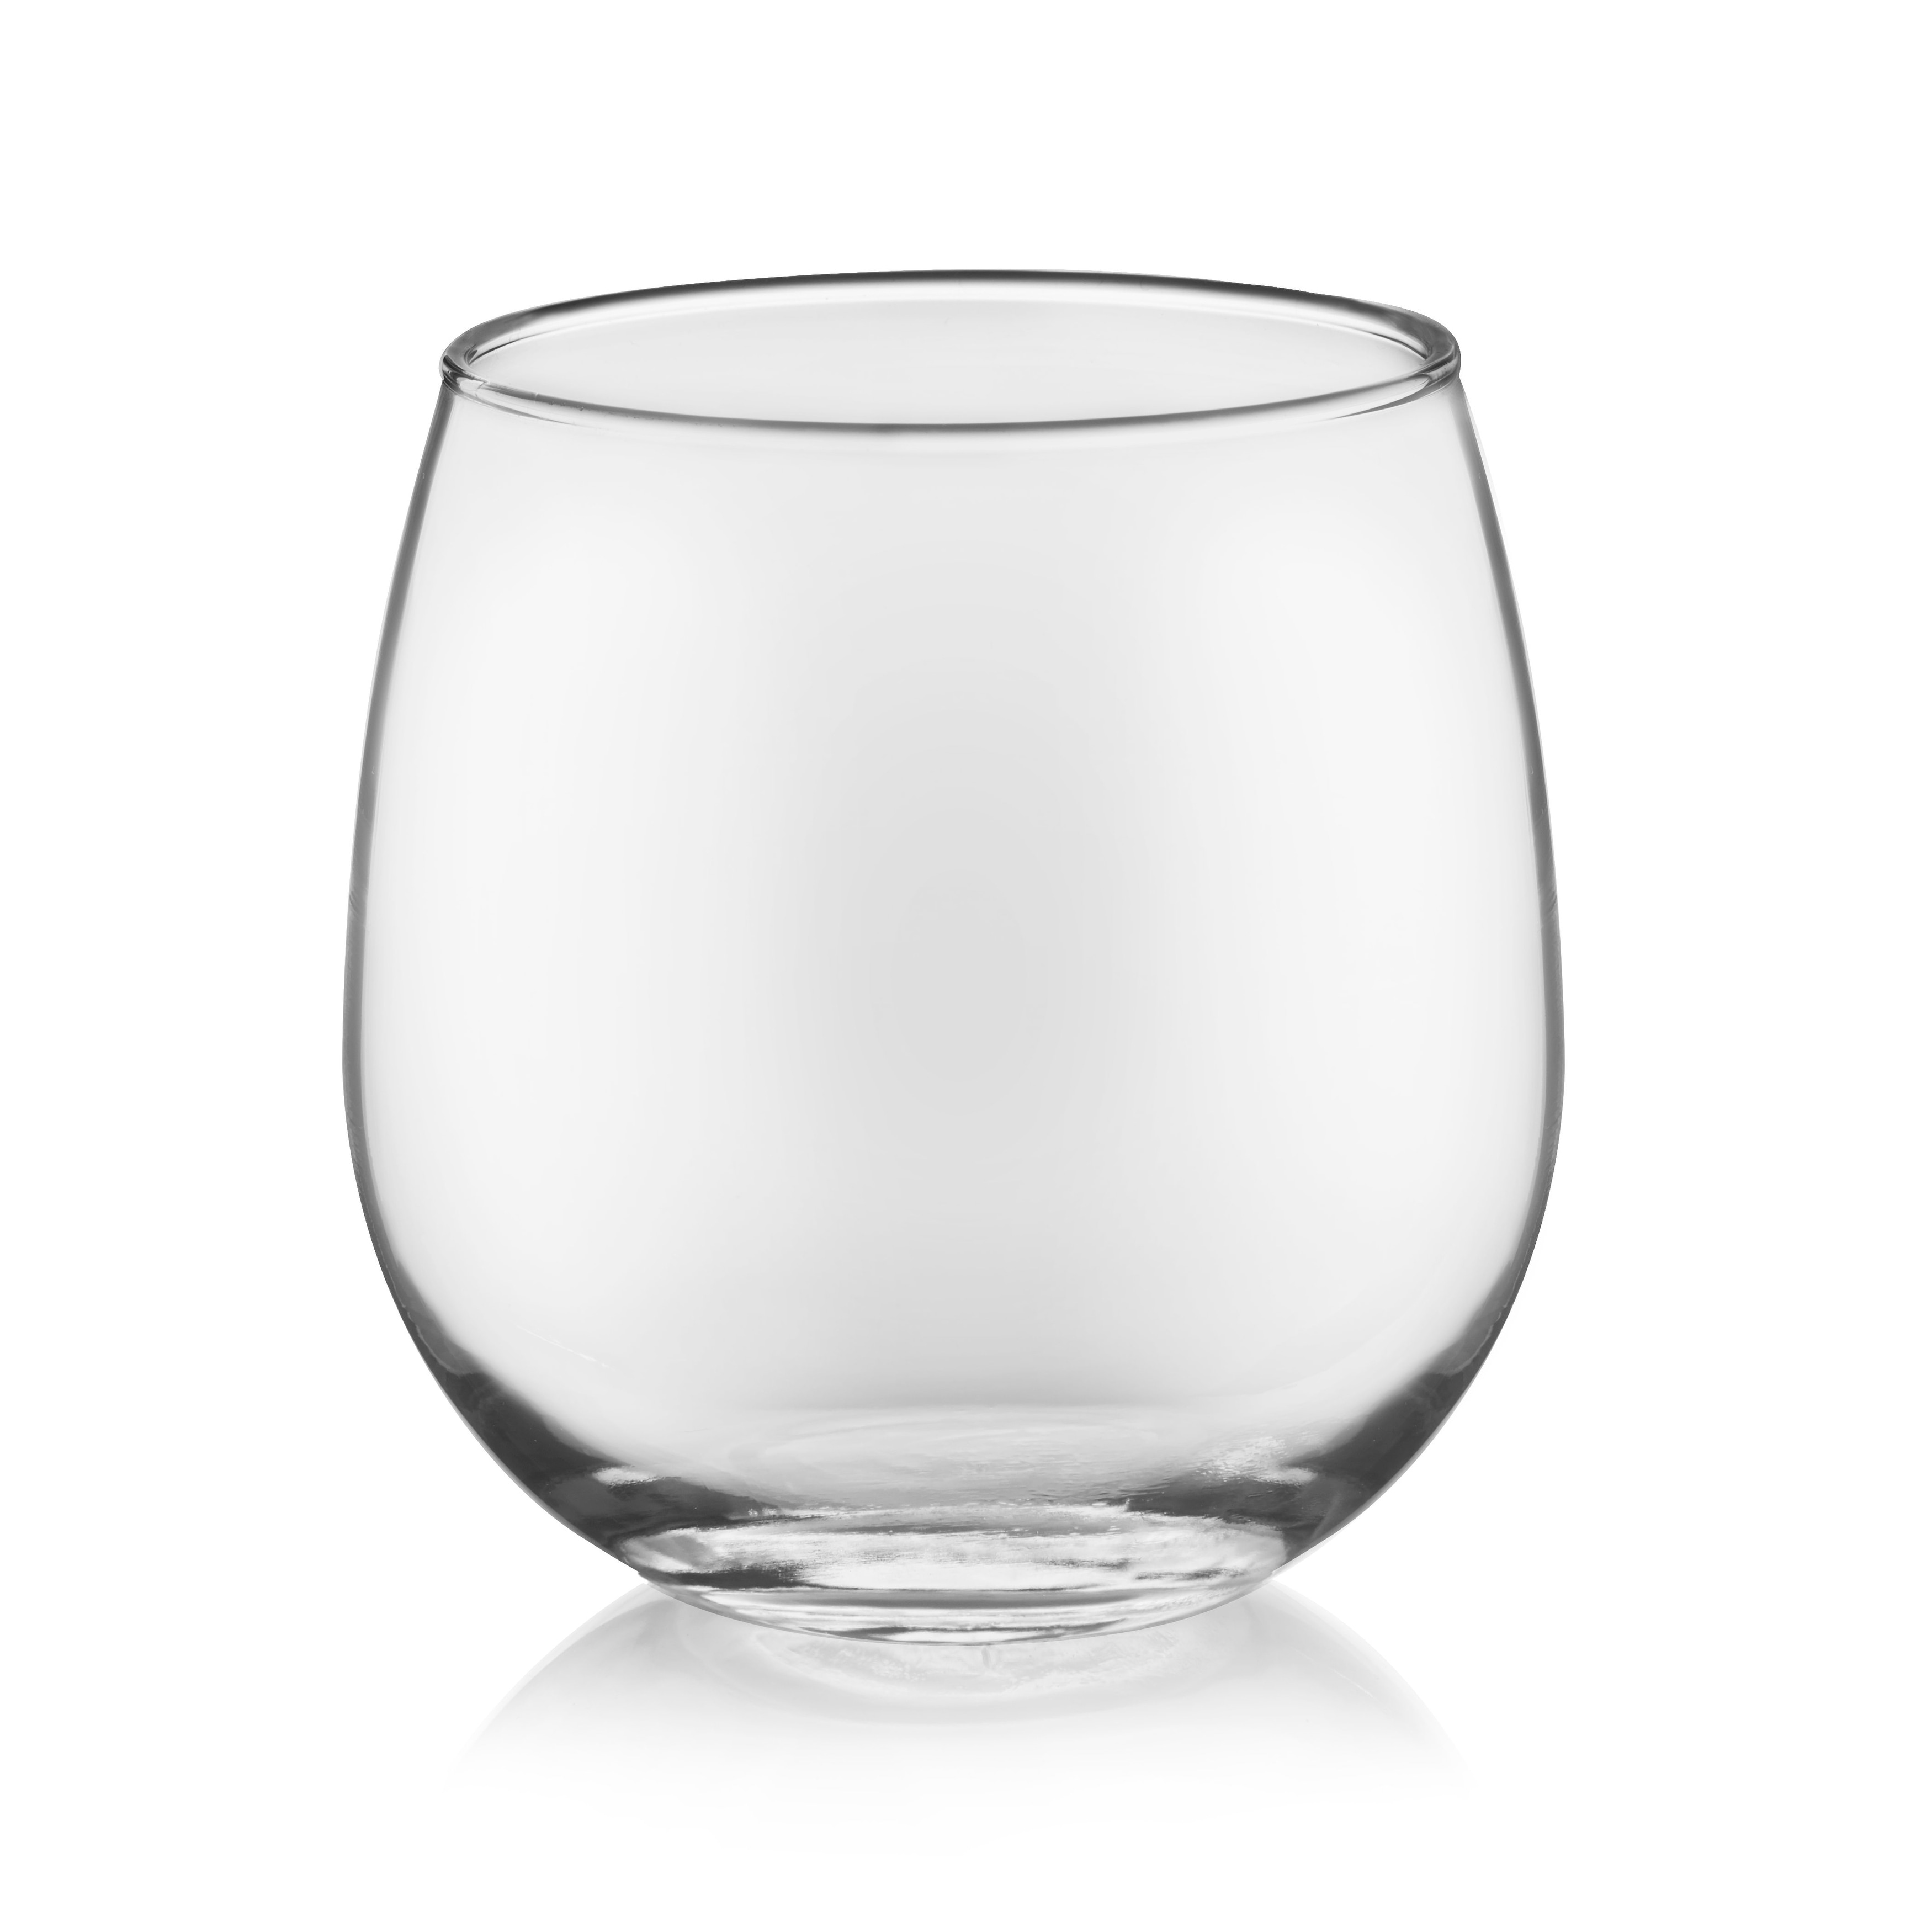 https://ak1.ostkcdn.com/images/products/is/images/direct/89986f96dbf9a9dd237bf59b2f9edbf9dcbc9ba8/Libbey-Stemless-Red-Wine-Glasses%2C-Set-of-8.jpg